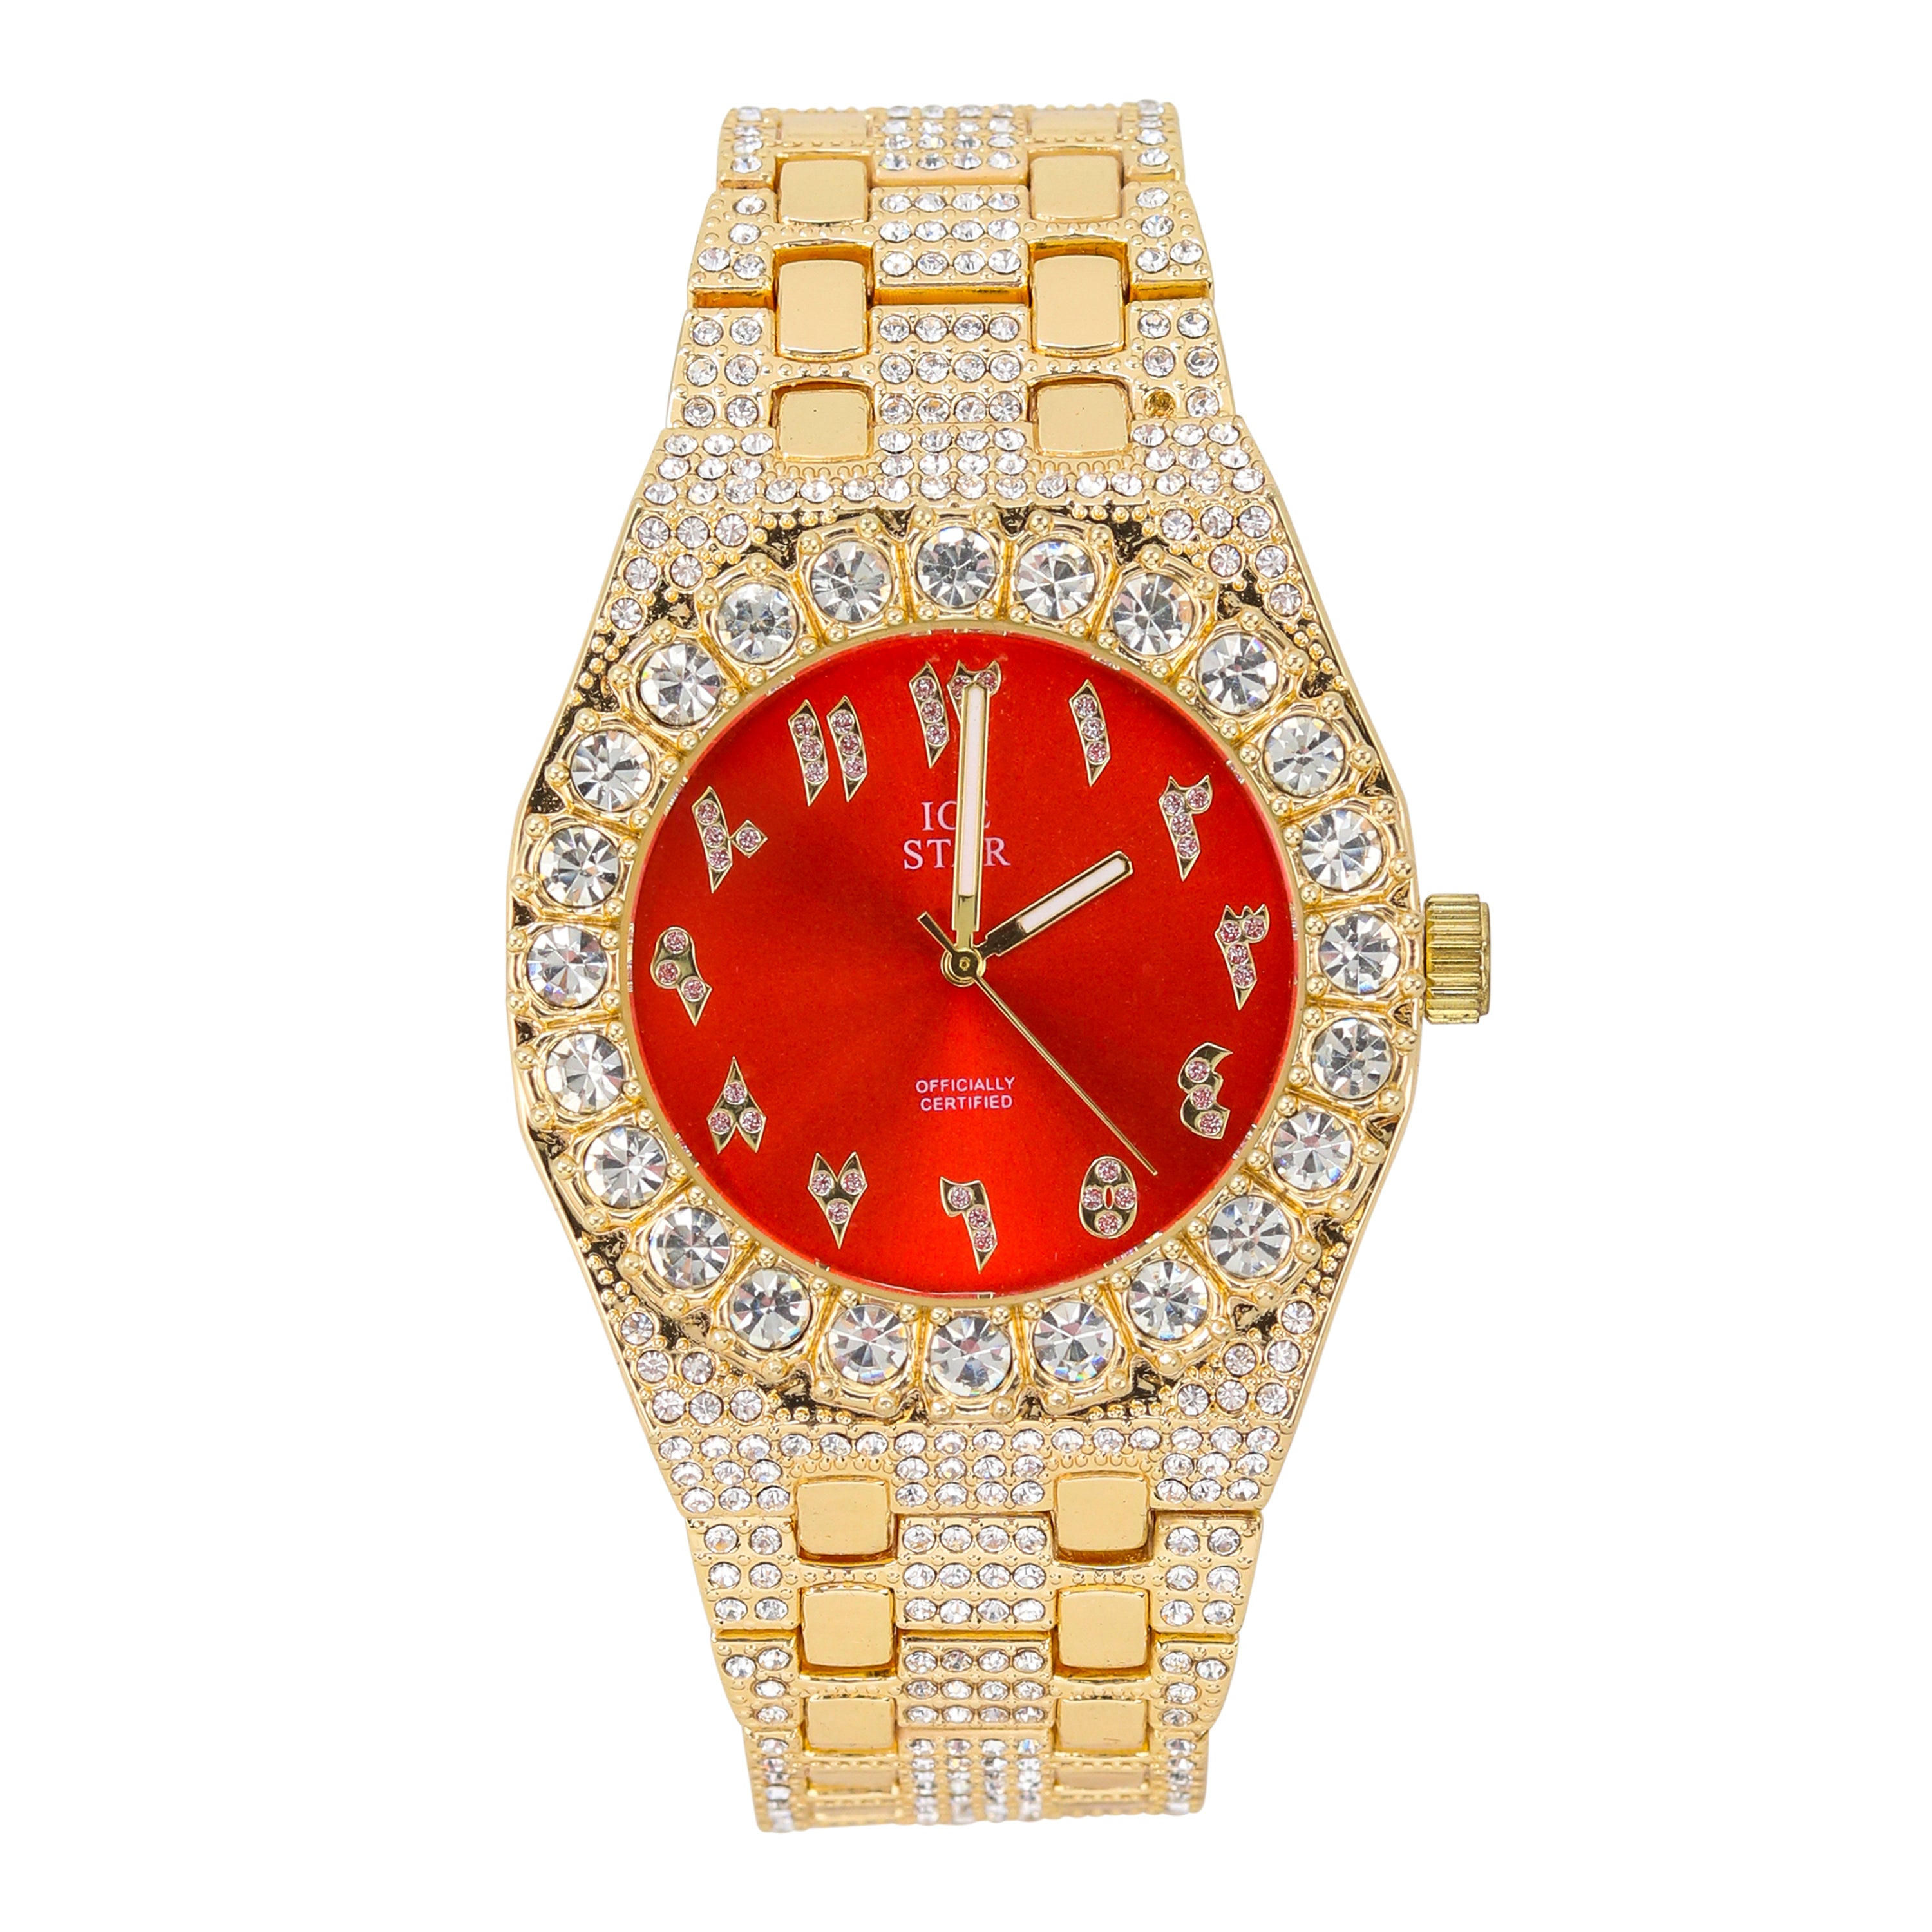 Men's Round Iced Out Watch 41mm Gold - Arab Dial